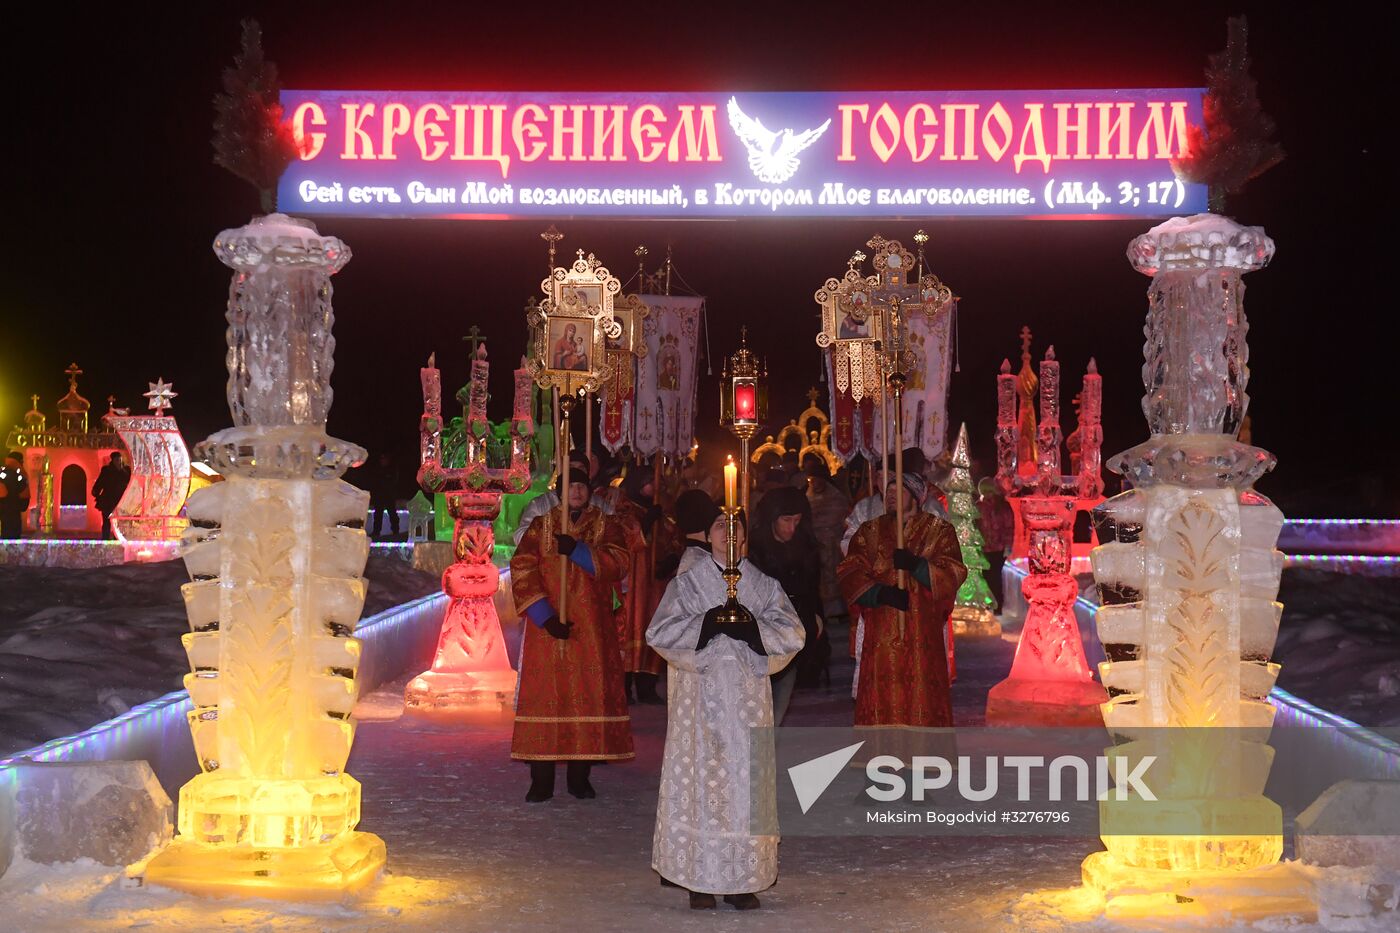 Orthodox Epiphany celebration in Russian cities